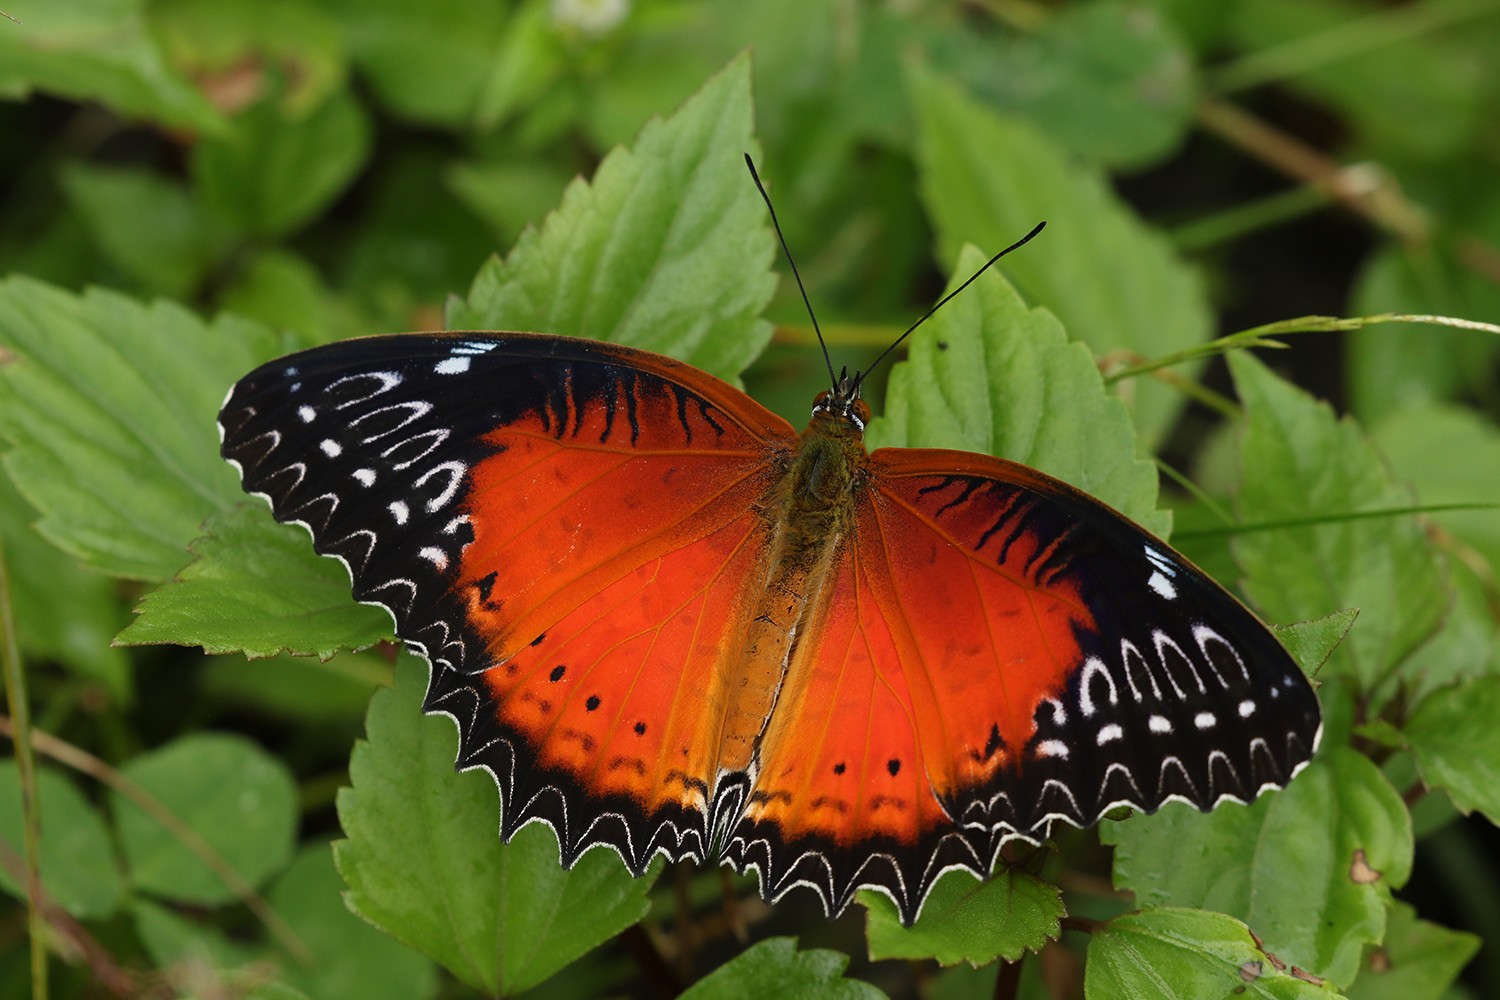 Butterflies shift their habitat due to climate change